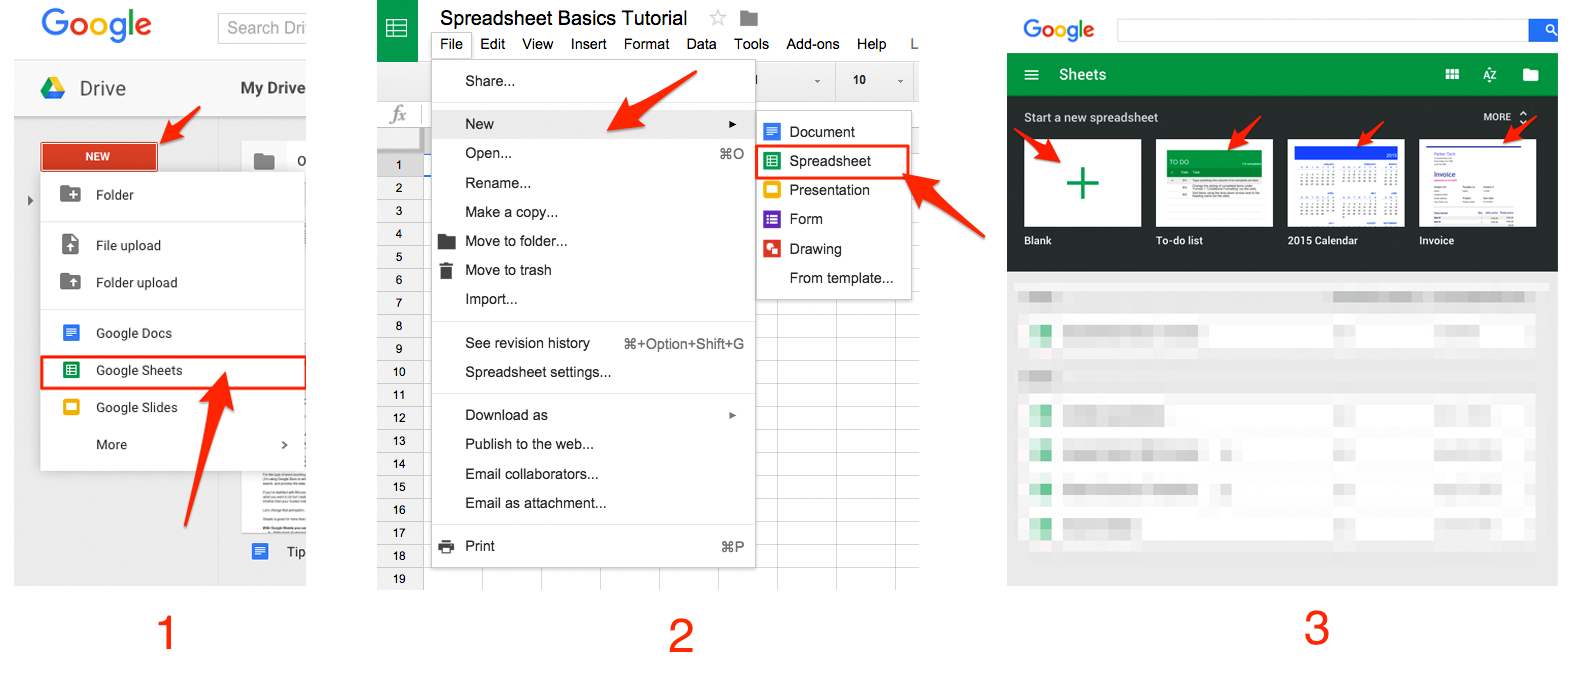 How To Create A Spreadsheet In Google With Google Sheets 101: The Beginner's Guide To Online Spreadsheets  The